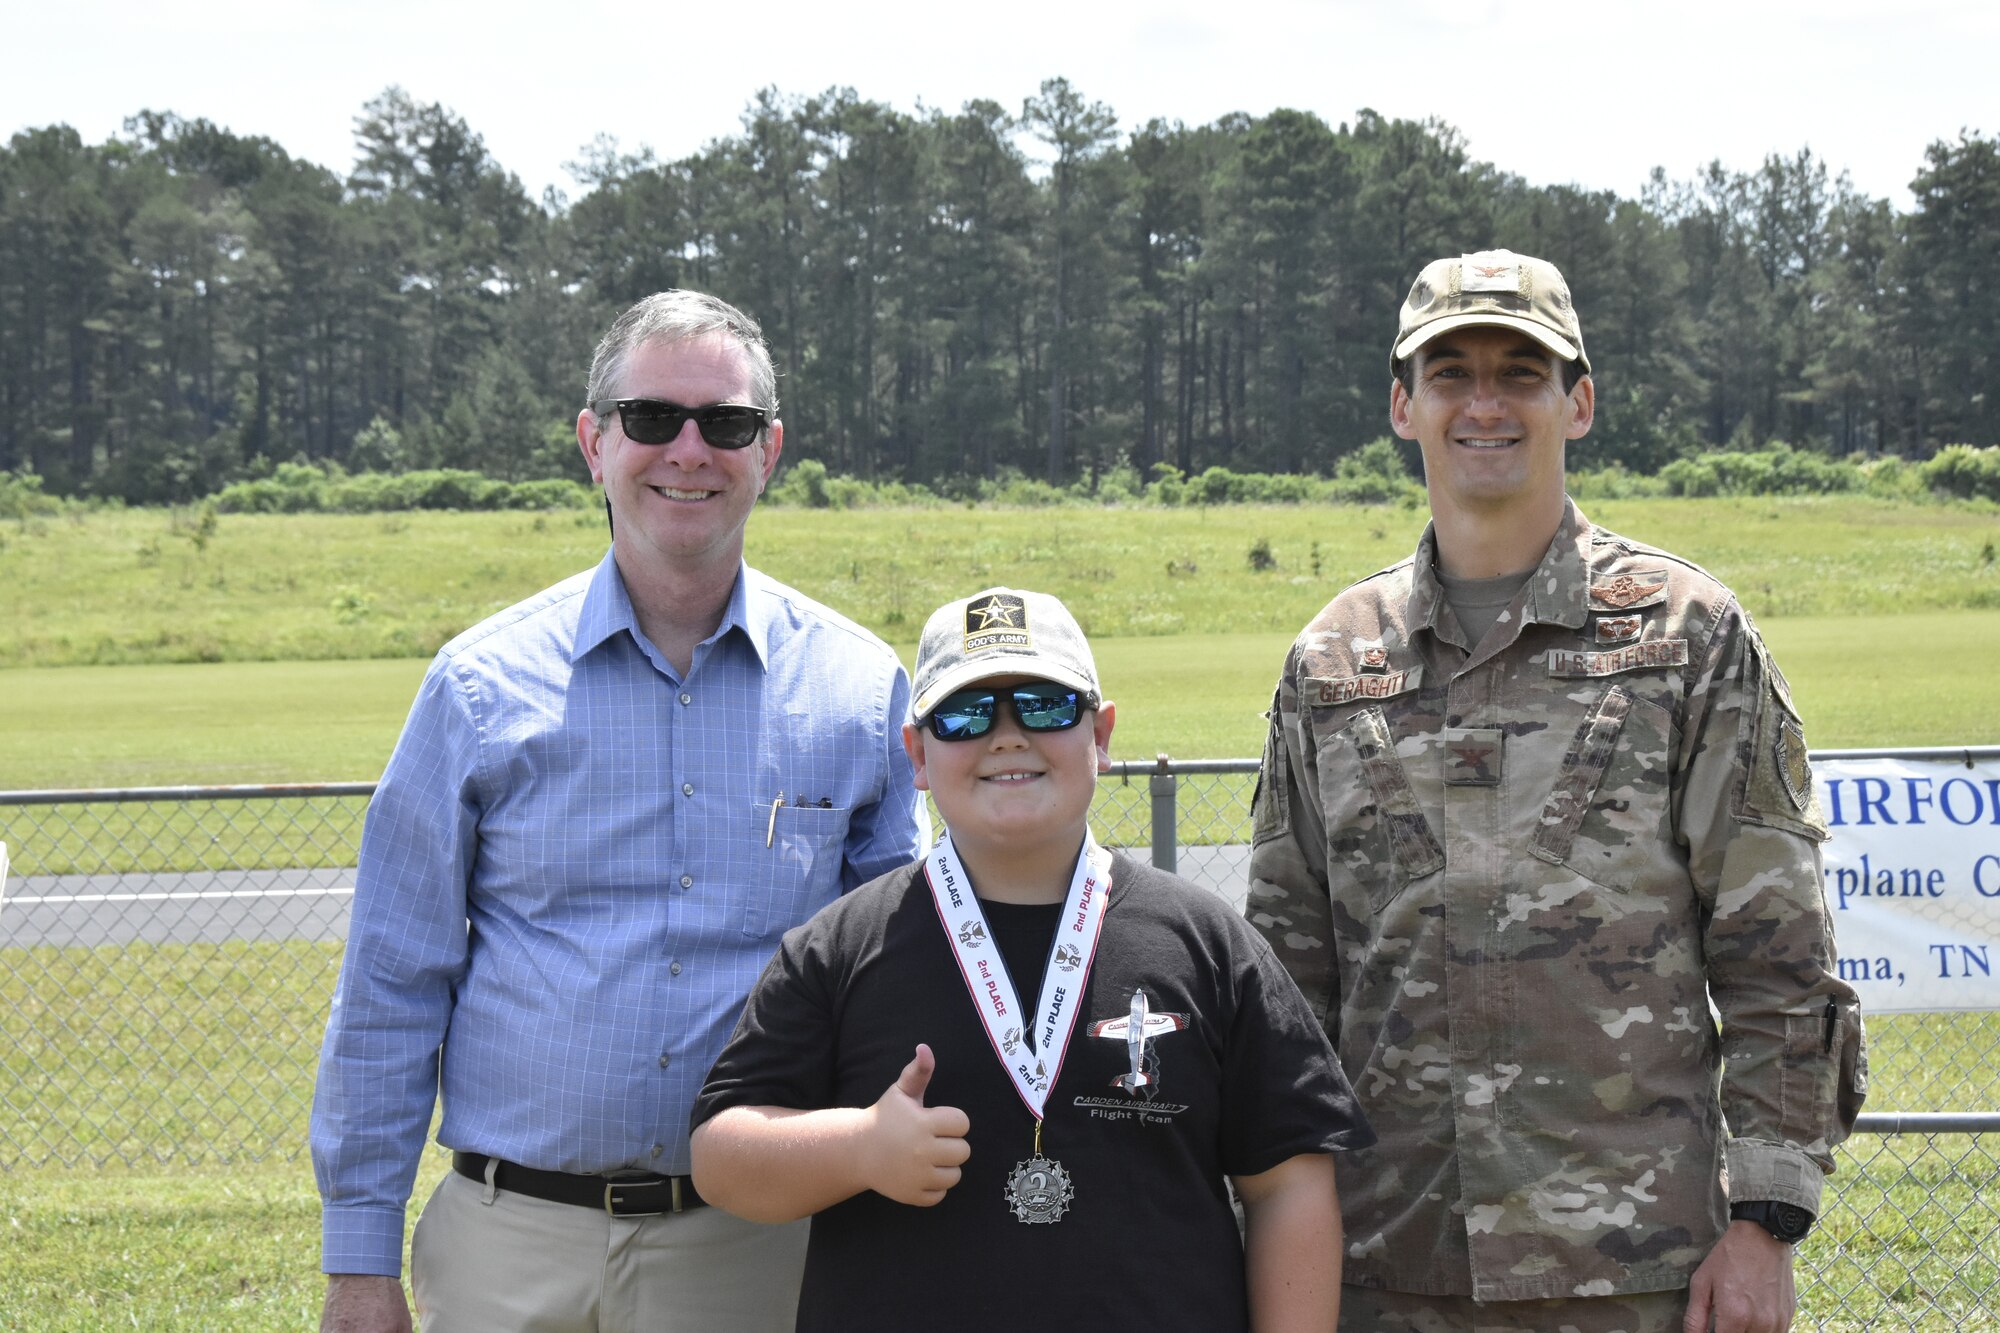 Will Jenkins, center, was a second-place winner in the Coffee Airfoilers Model RC Club June 26, 2021, airplane toss competition hosted by the club to coincide with the Arnold Engineering Development Complex 70th anniversary. Also pictured are AEDC Commander Col. Jeffrey Geraghty, right, and AEDC Vice Director Jason Coker. Youth participating in the event were tasked with assembling small balsa wood airplanes, with prizes going to those whose planes flew the furthest from the launch line. The event was intended to promote science, technology, engineering and mathematics, or STEM, interest among students taking part. (U.S. Air Force photo by Bradley Hicks)